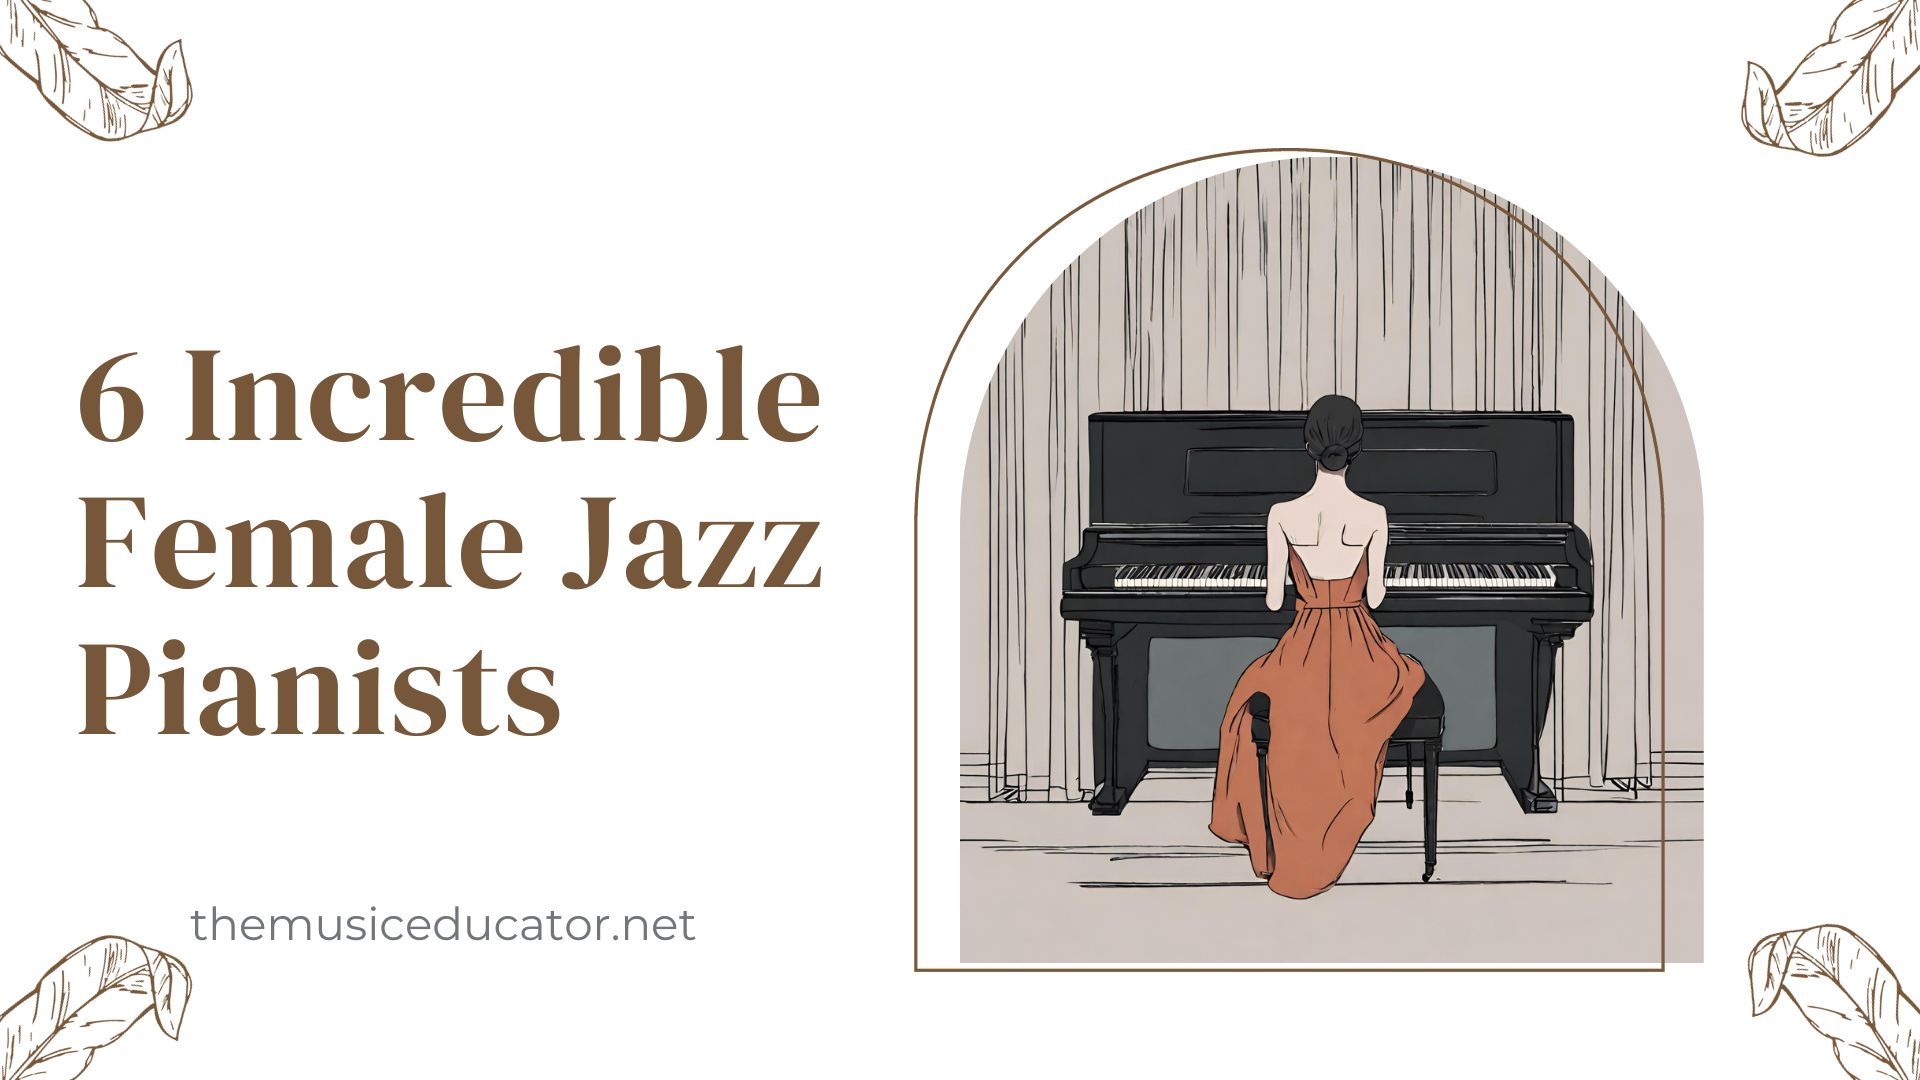 6 Incredible Female Jazz Pianists